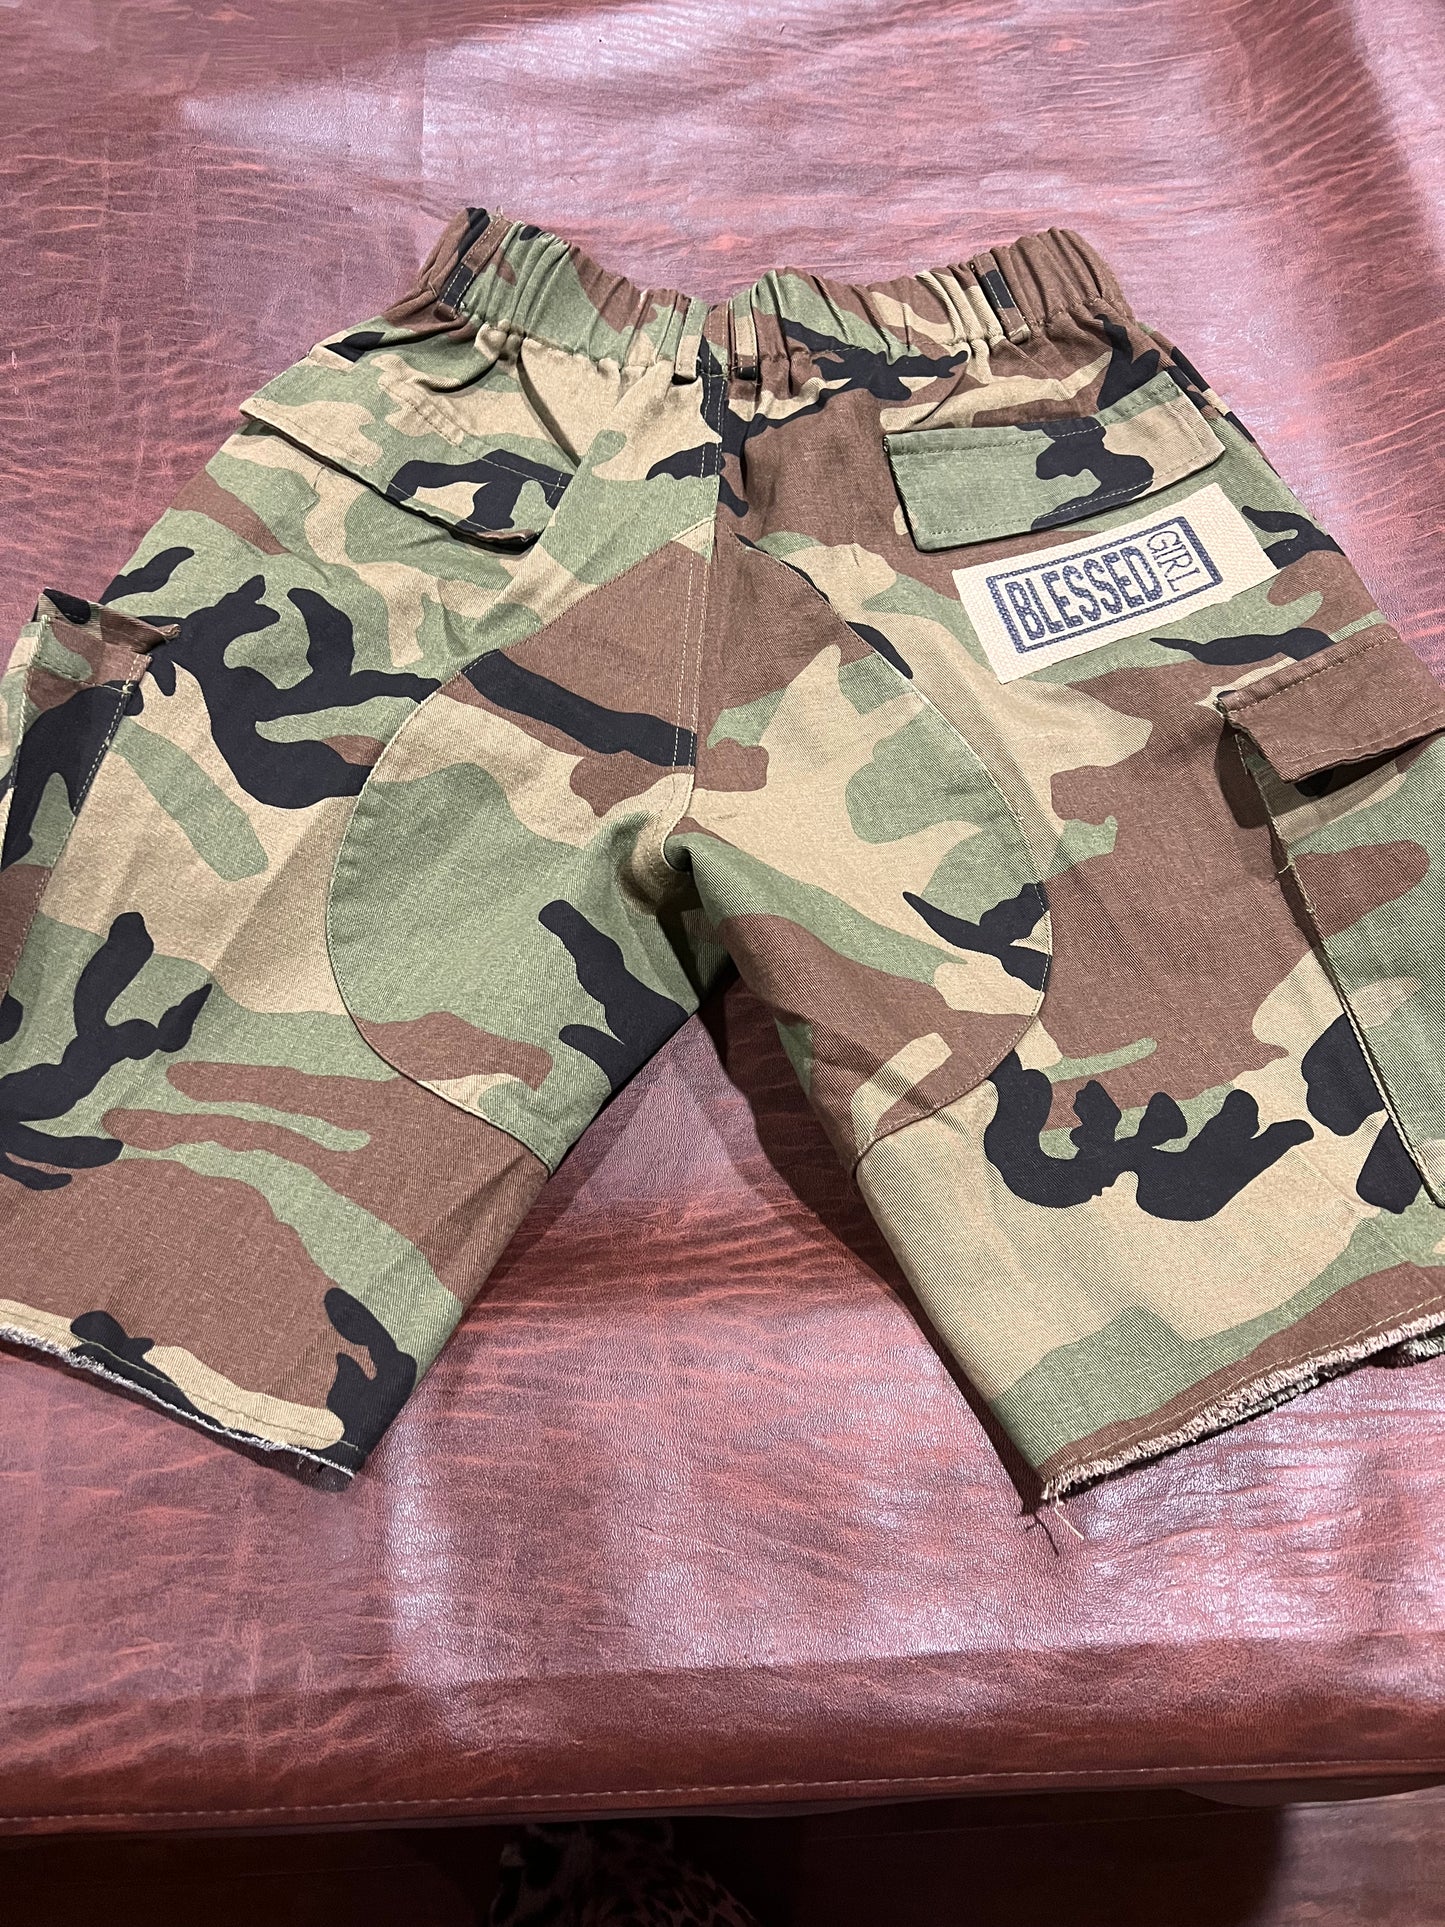 Blessed Girl Camo Shorts